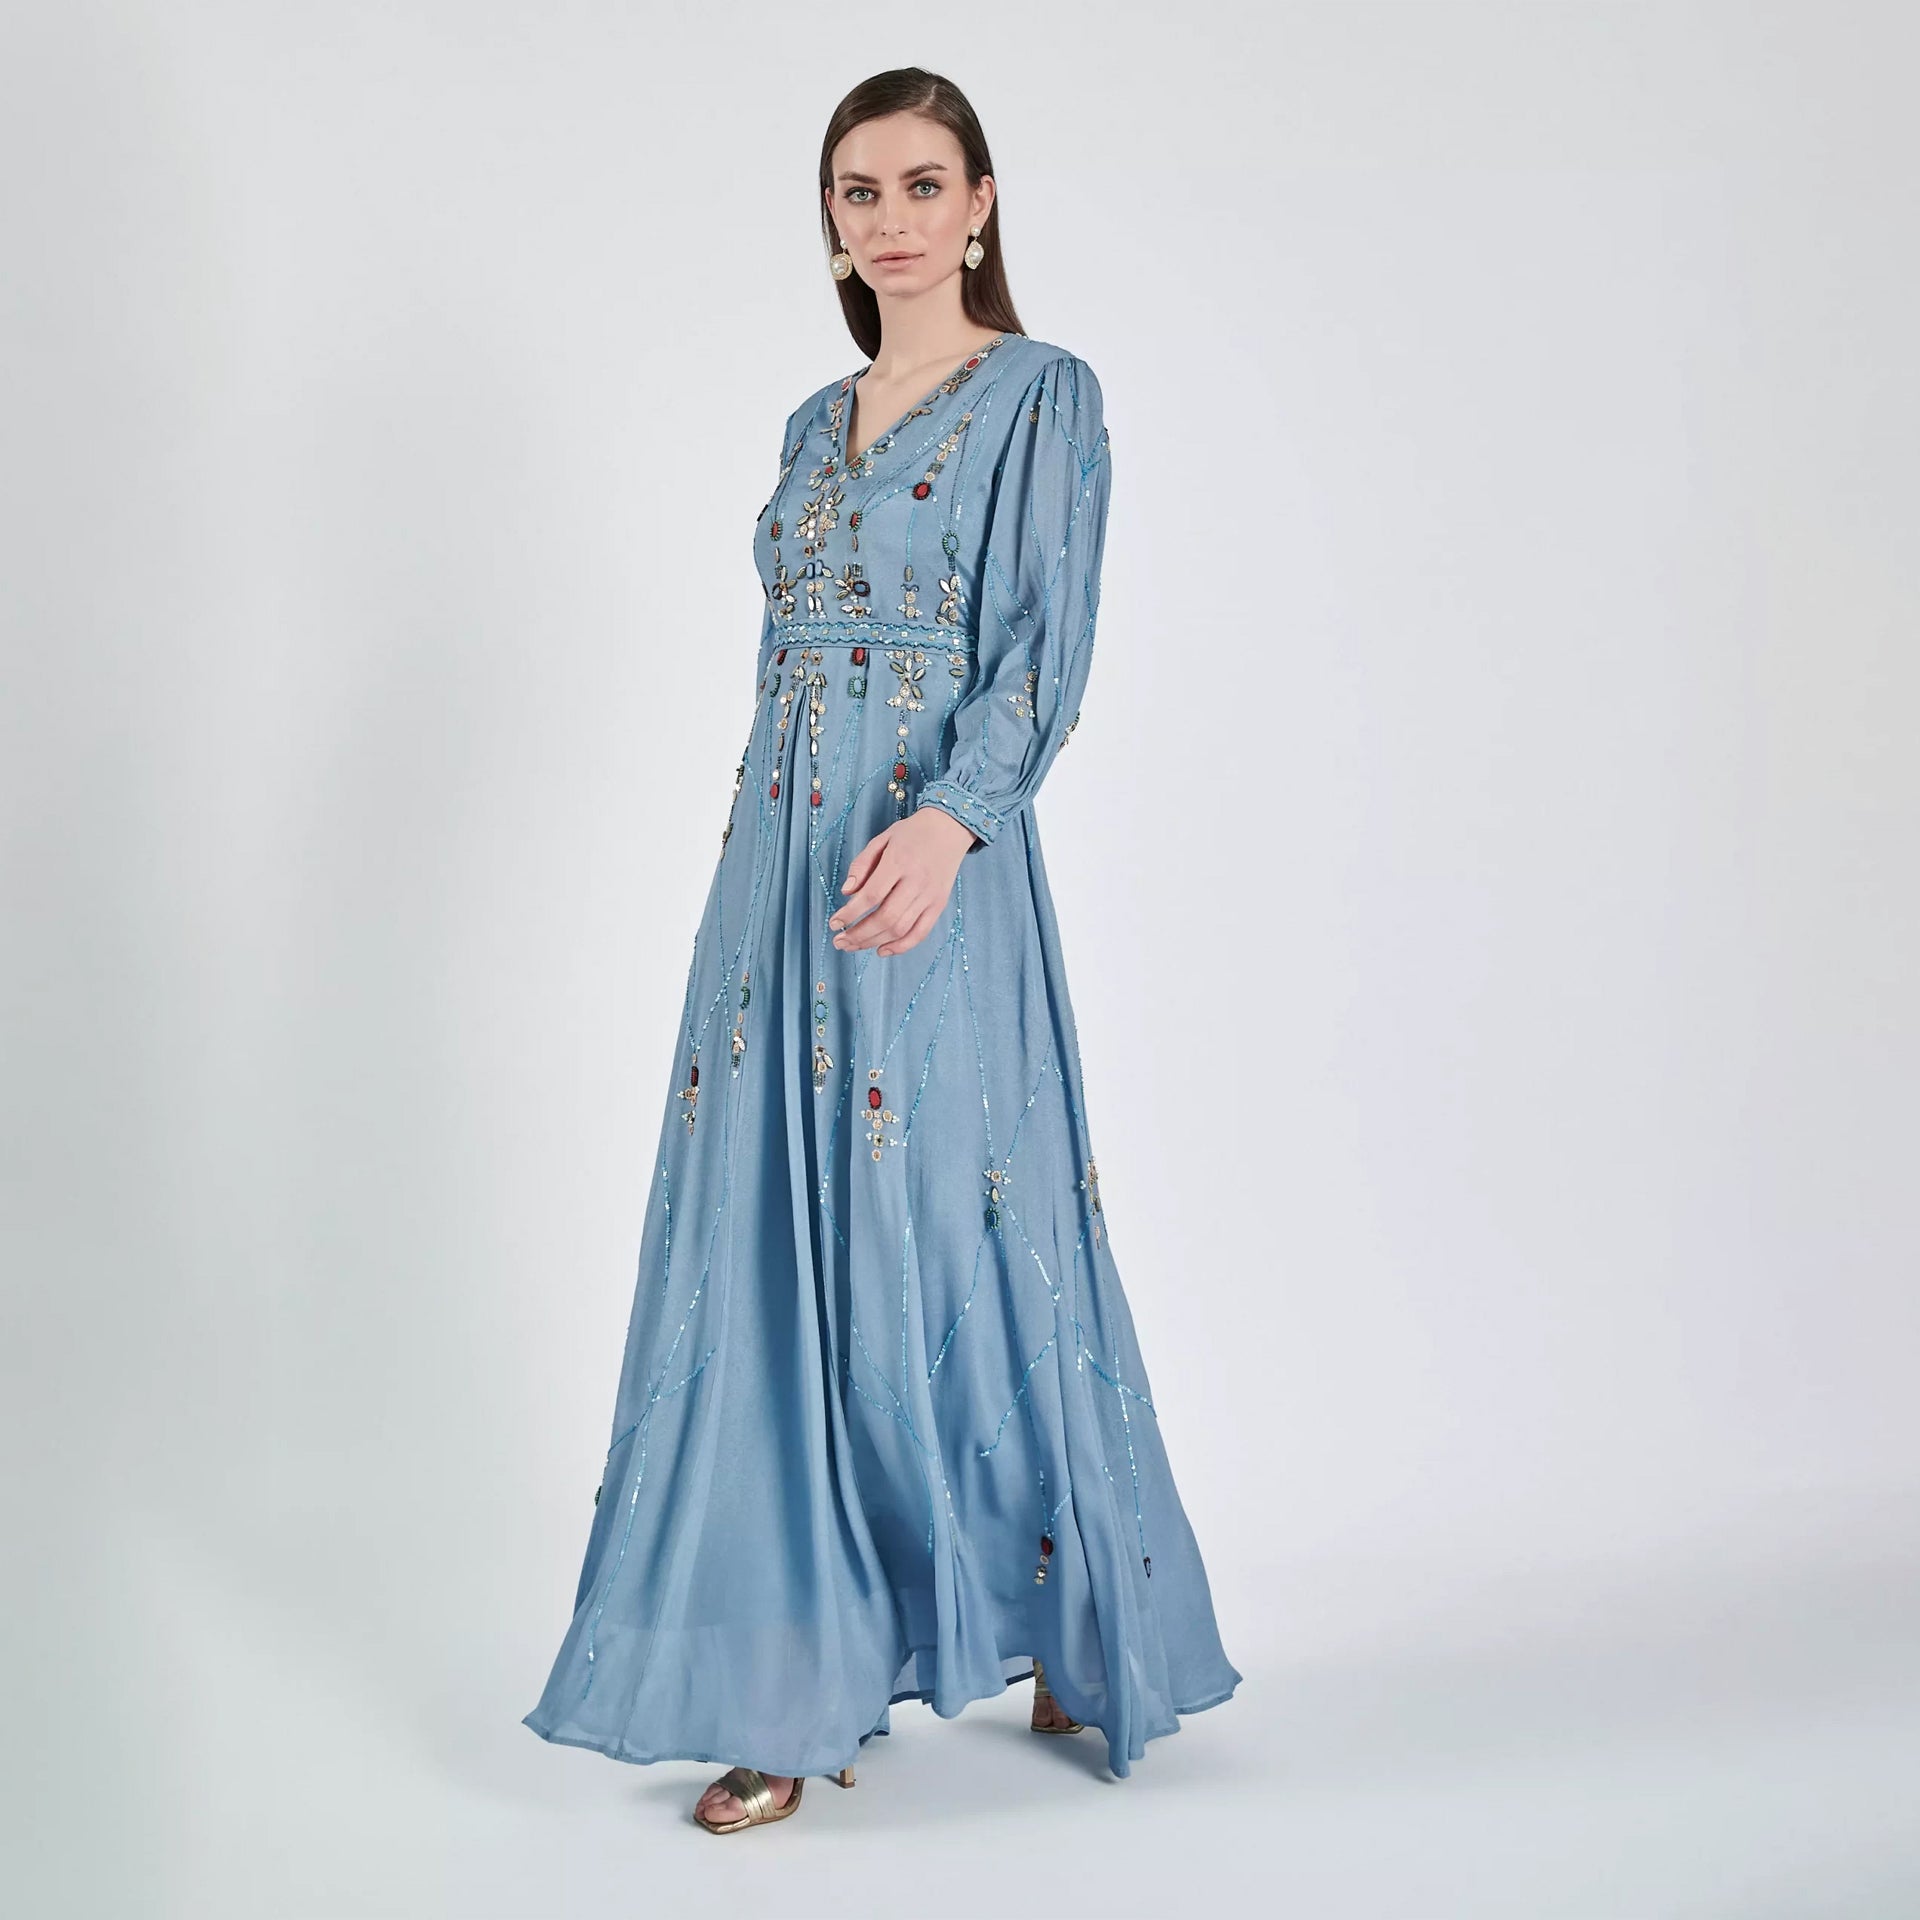 Sky Blue Crepe Dalin Dress with Long Sleeves